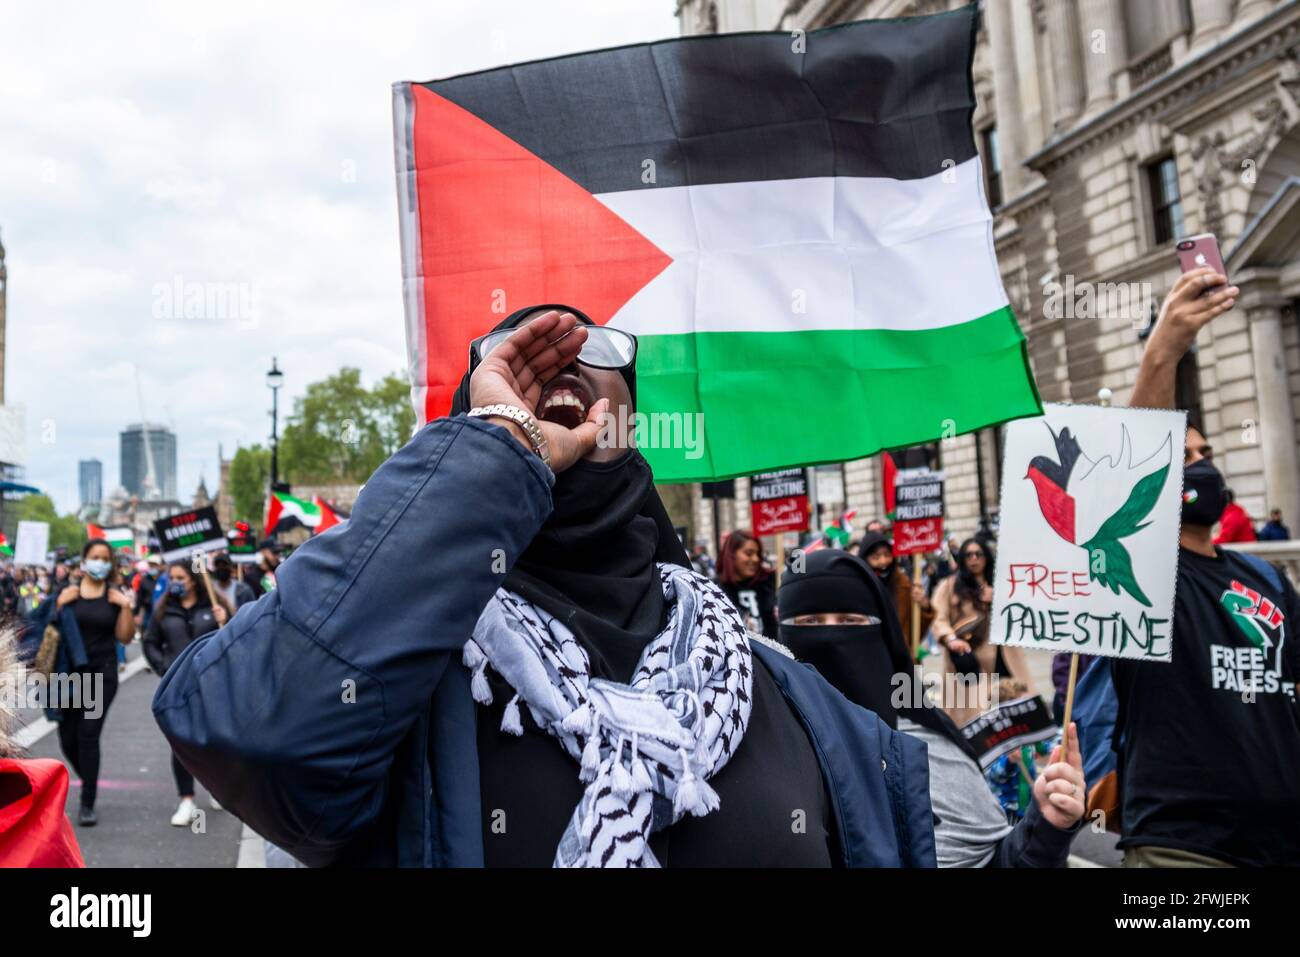 Protester at National Demonstration for Palestine, Free Palestine, in London, UK. Female chanting, with flag. Free Palestine placard Stock Photo